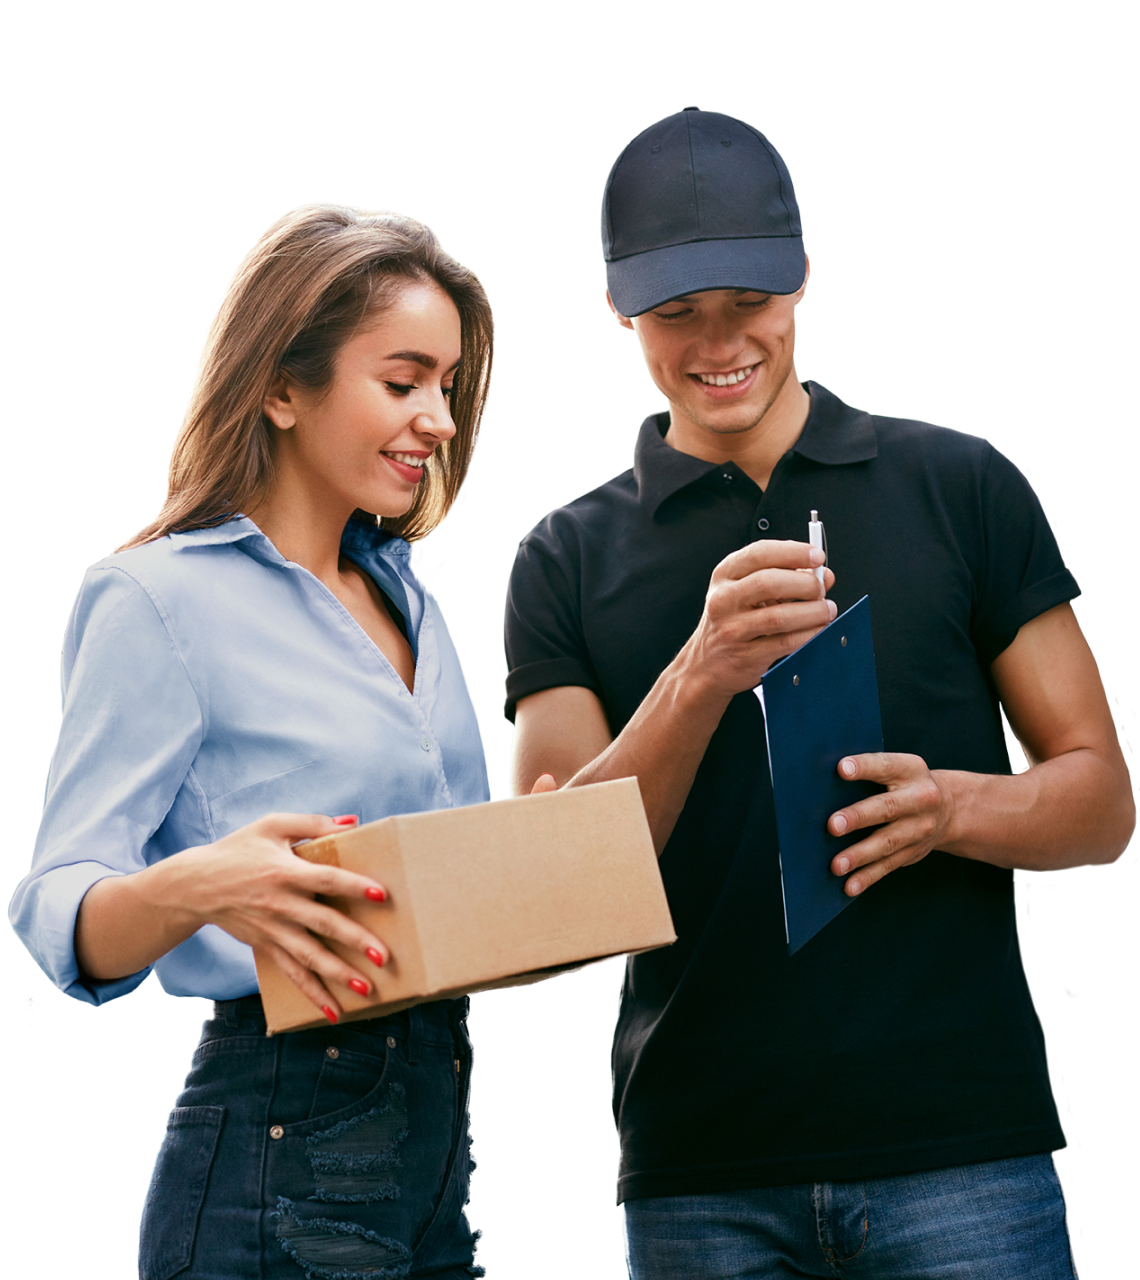 Delivery Courier service in Court - courier with tablet - borzo delivery